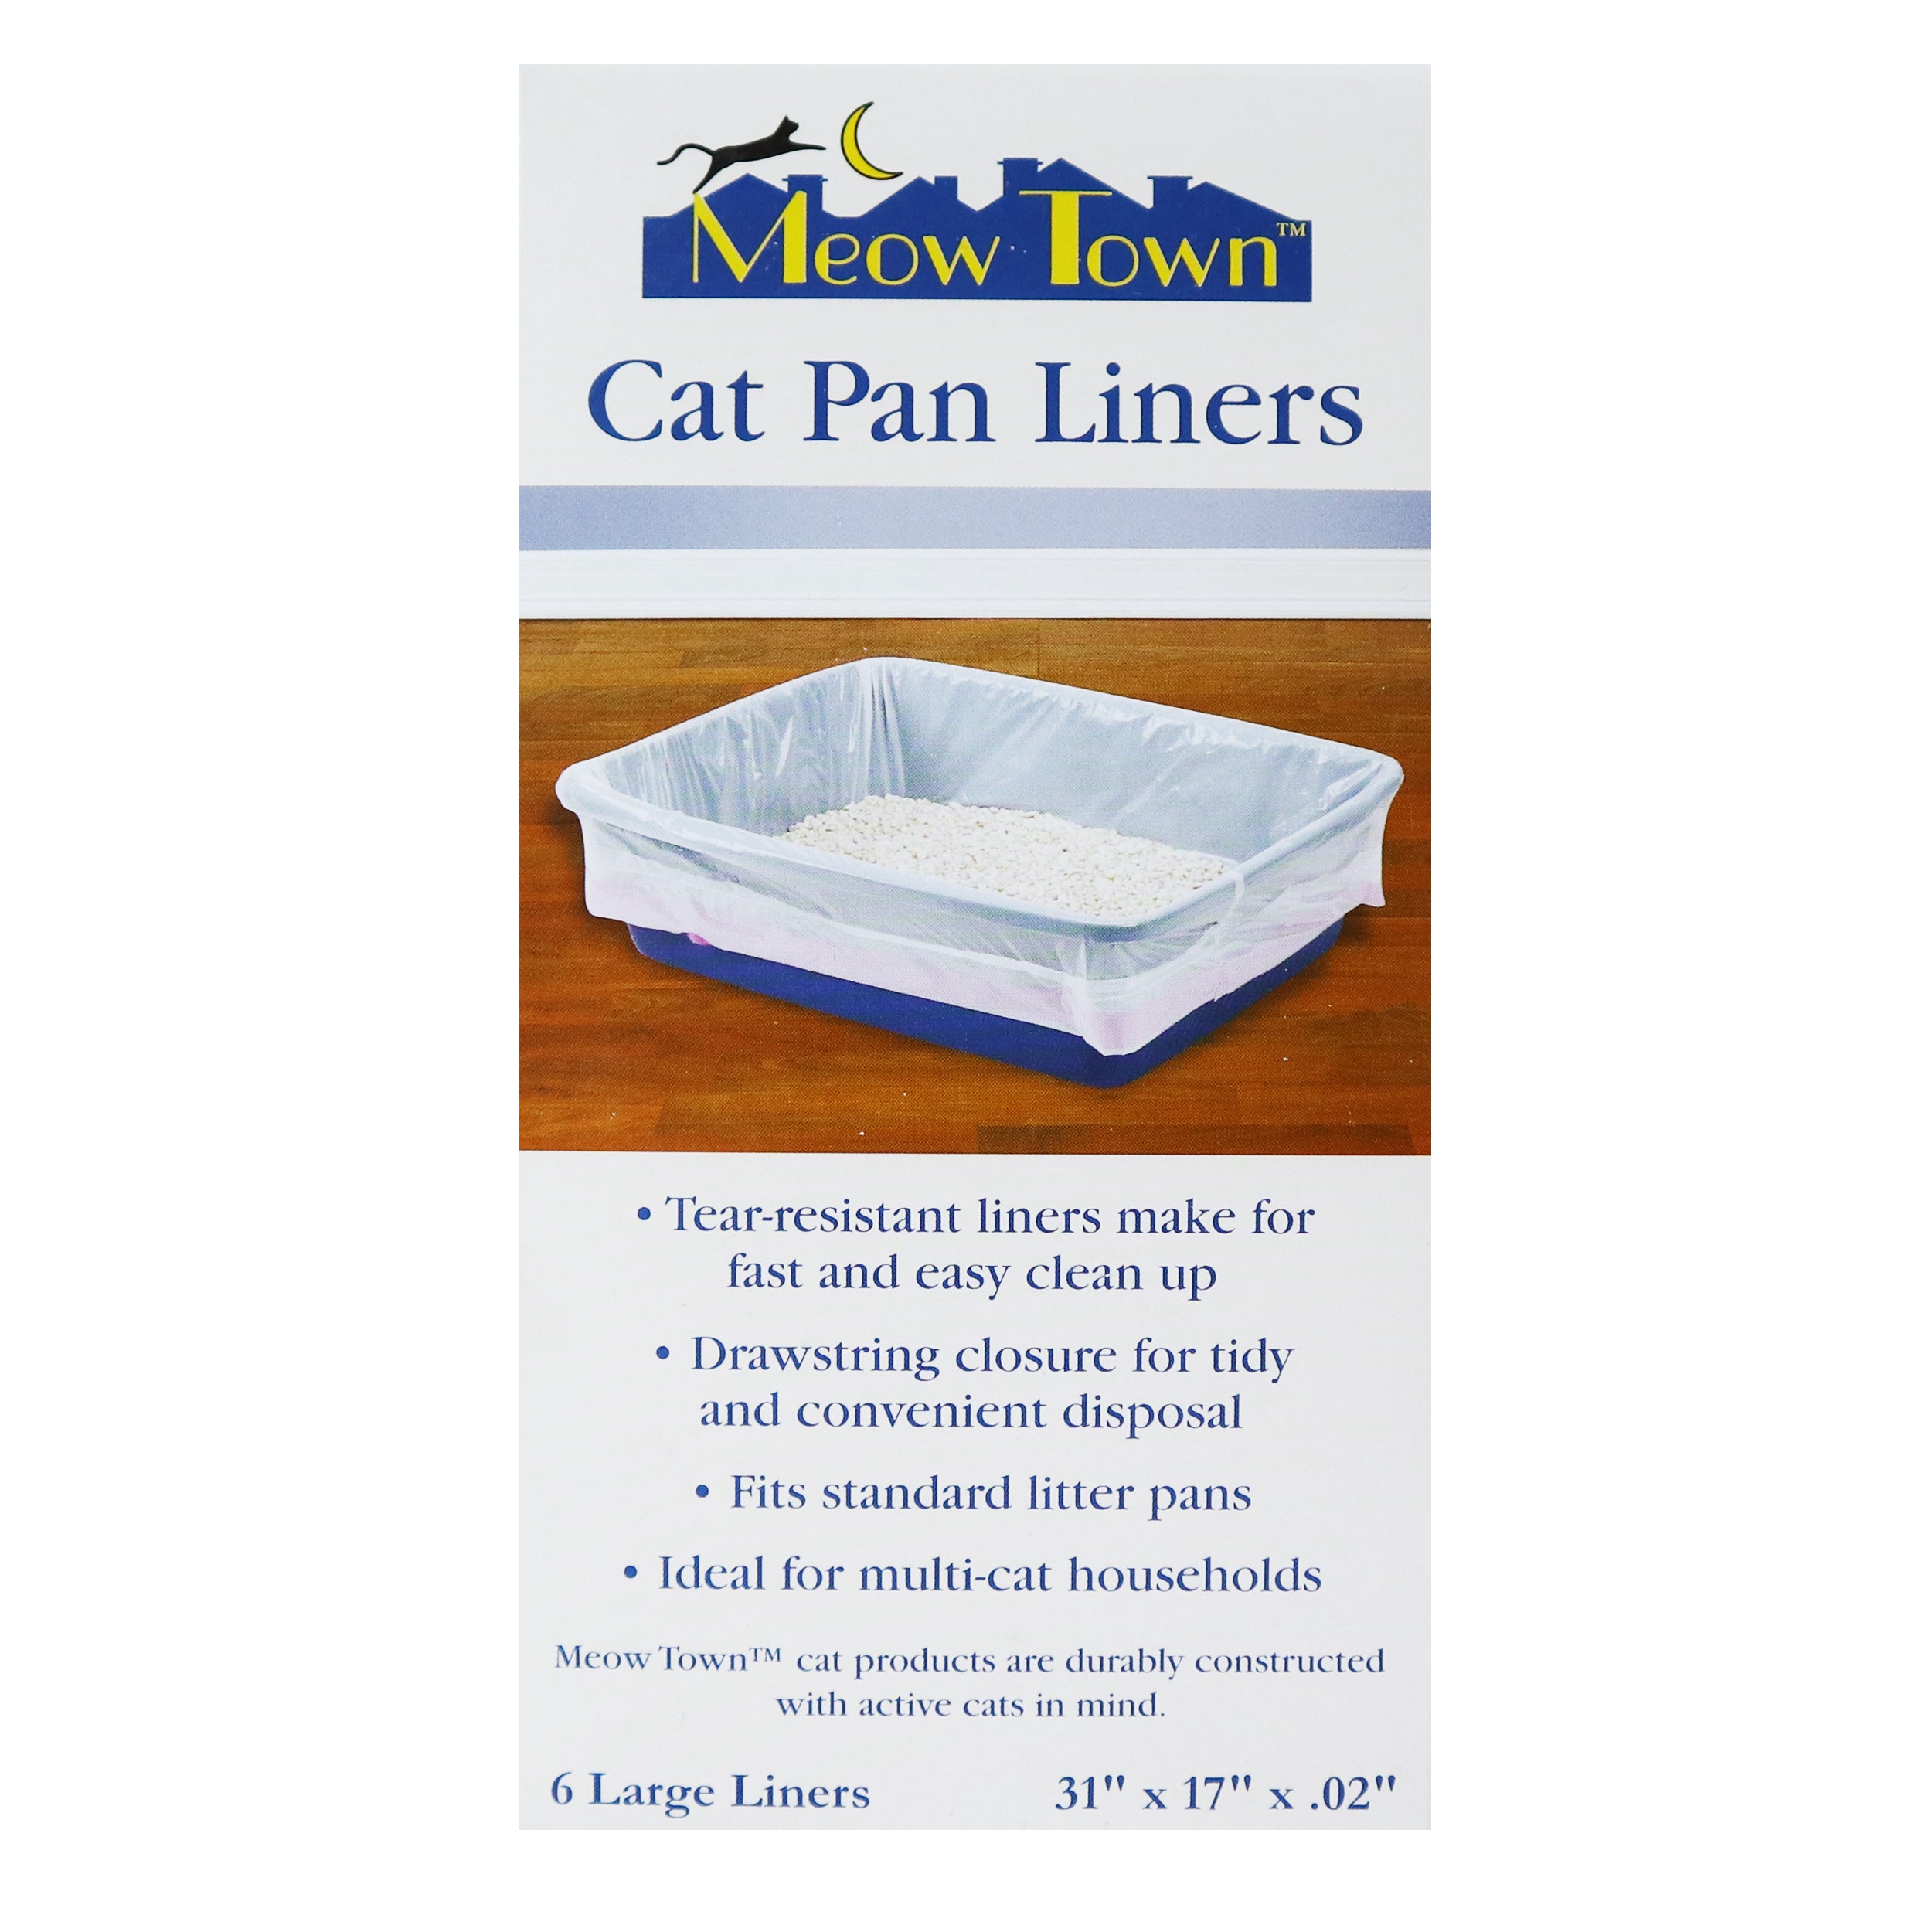 Meow Town Cat Pan Liners